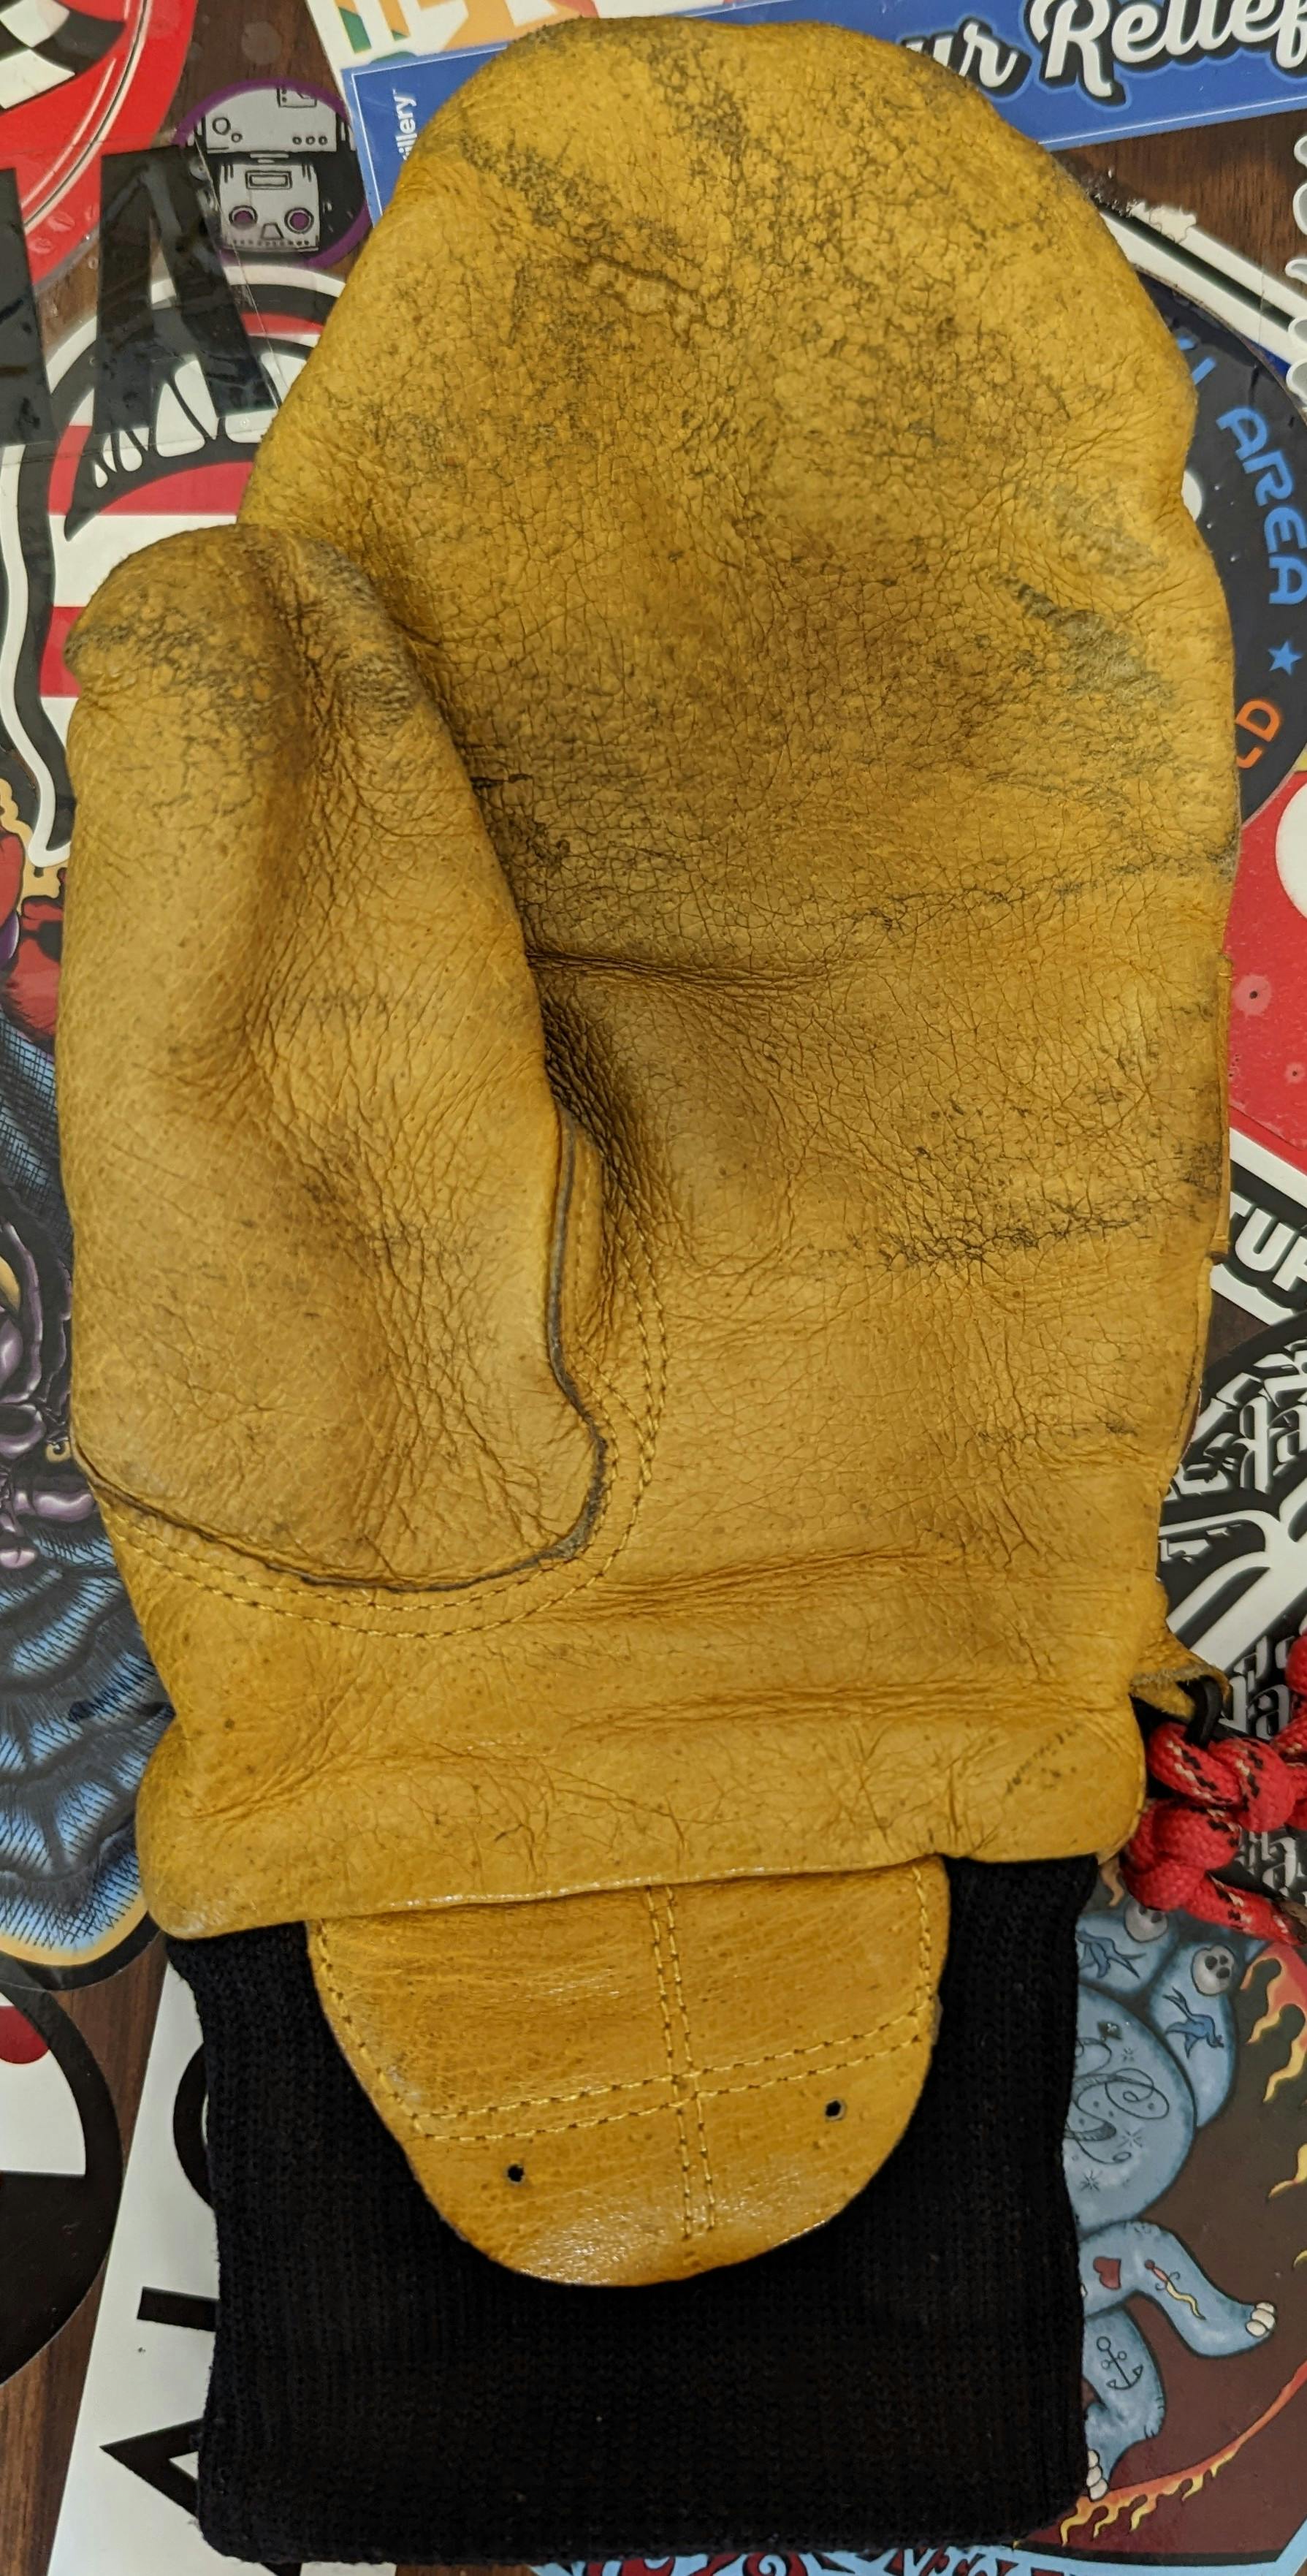 Left palm of the Flylow Oven Mittens showing minor wear.